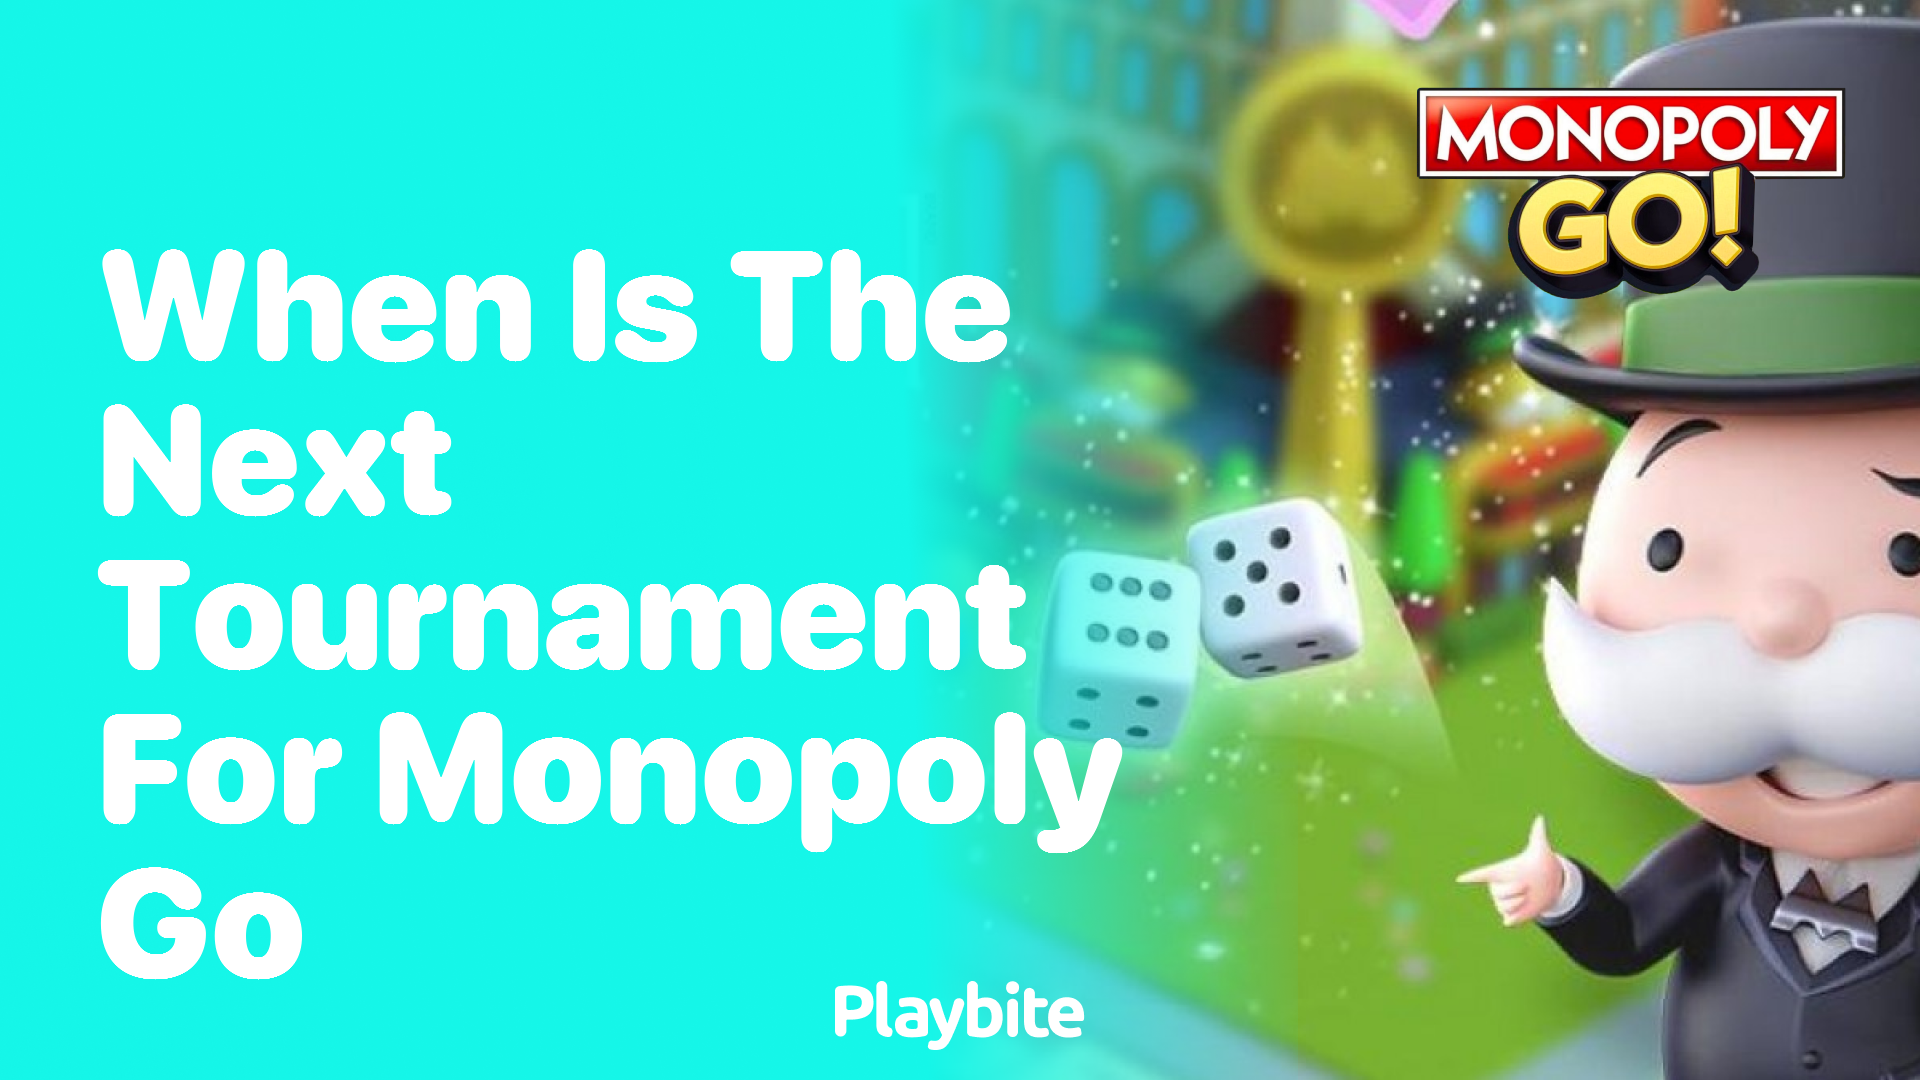 When is the Next Tournament for Monopoly Go?